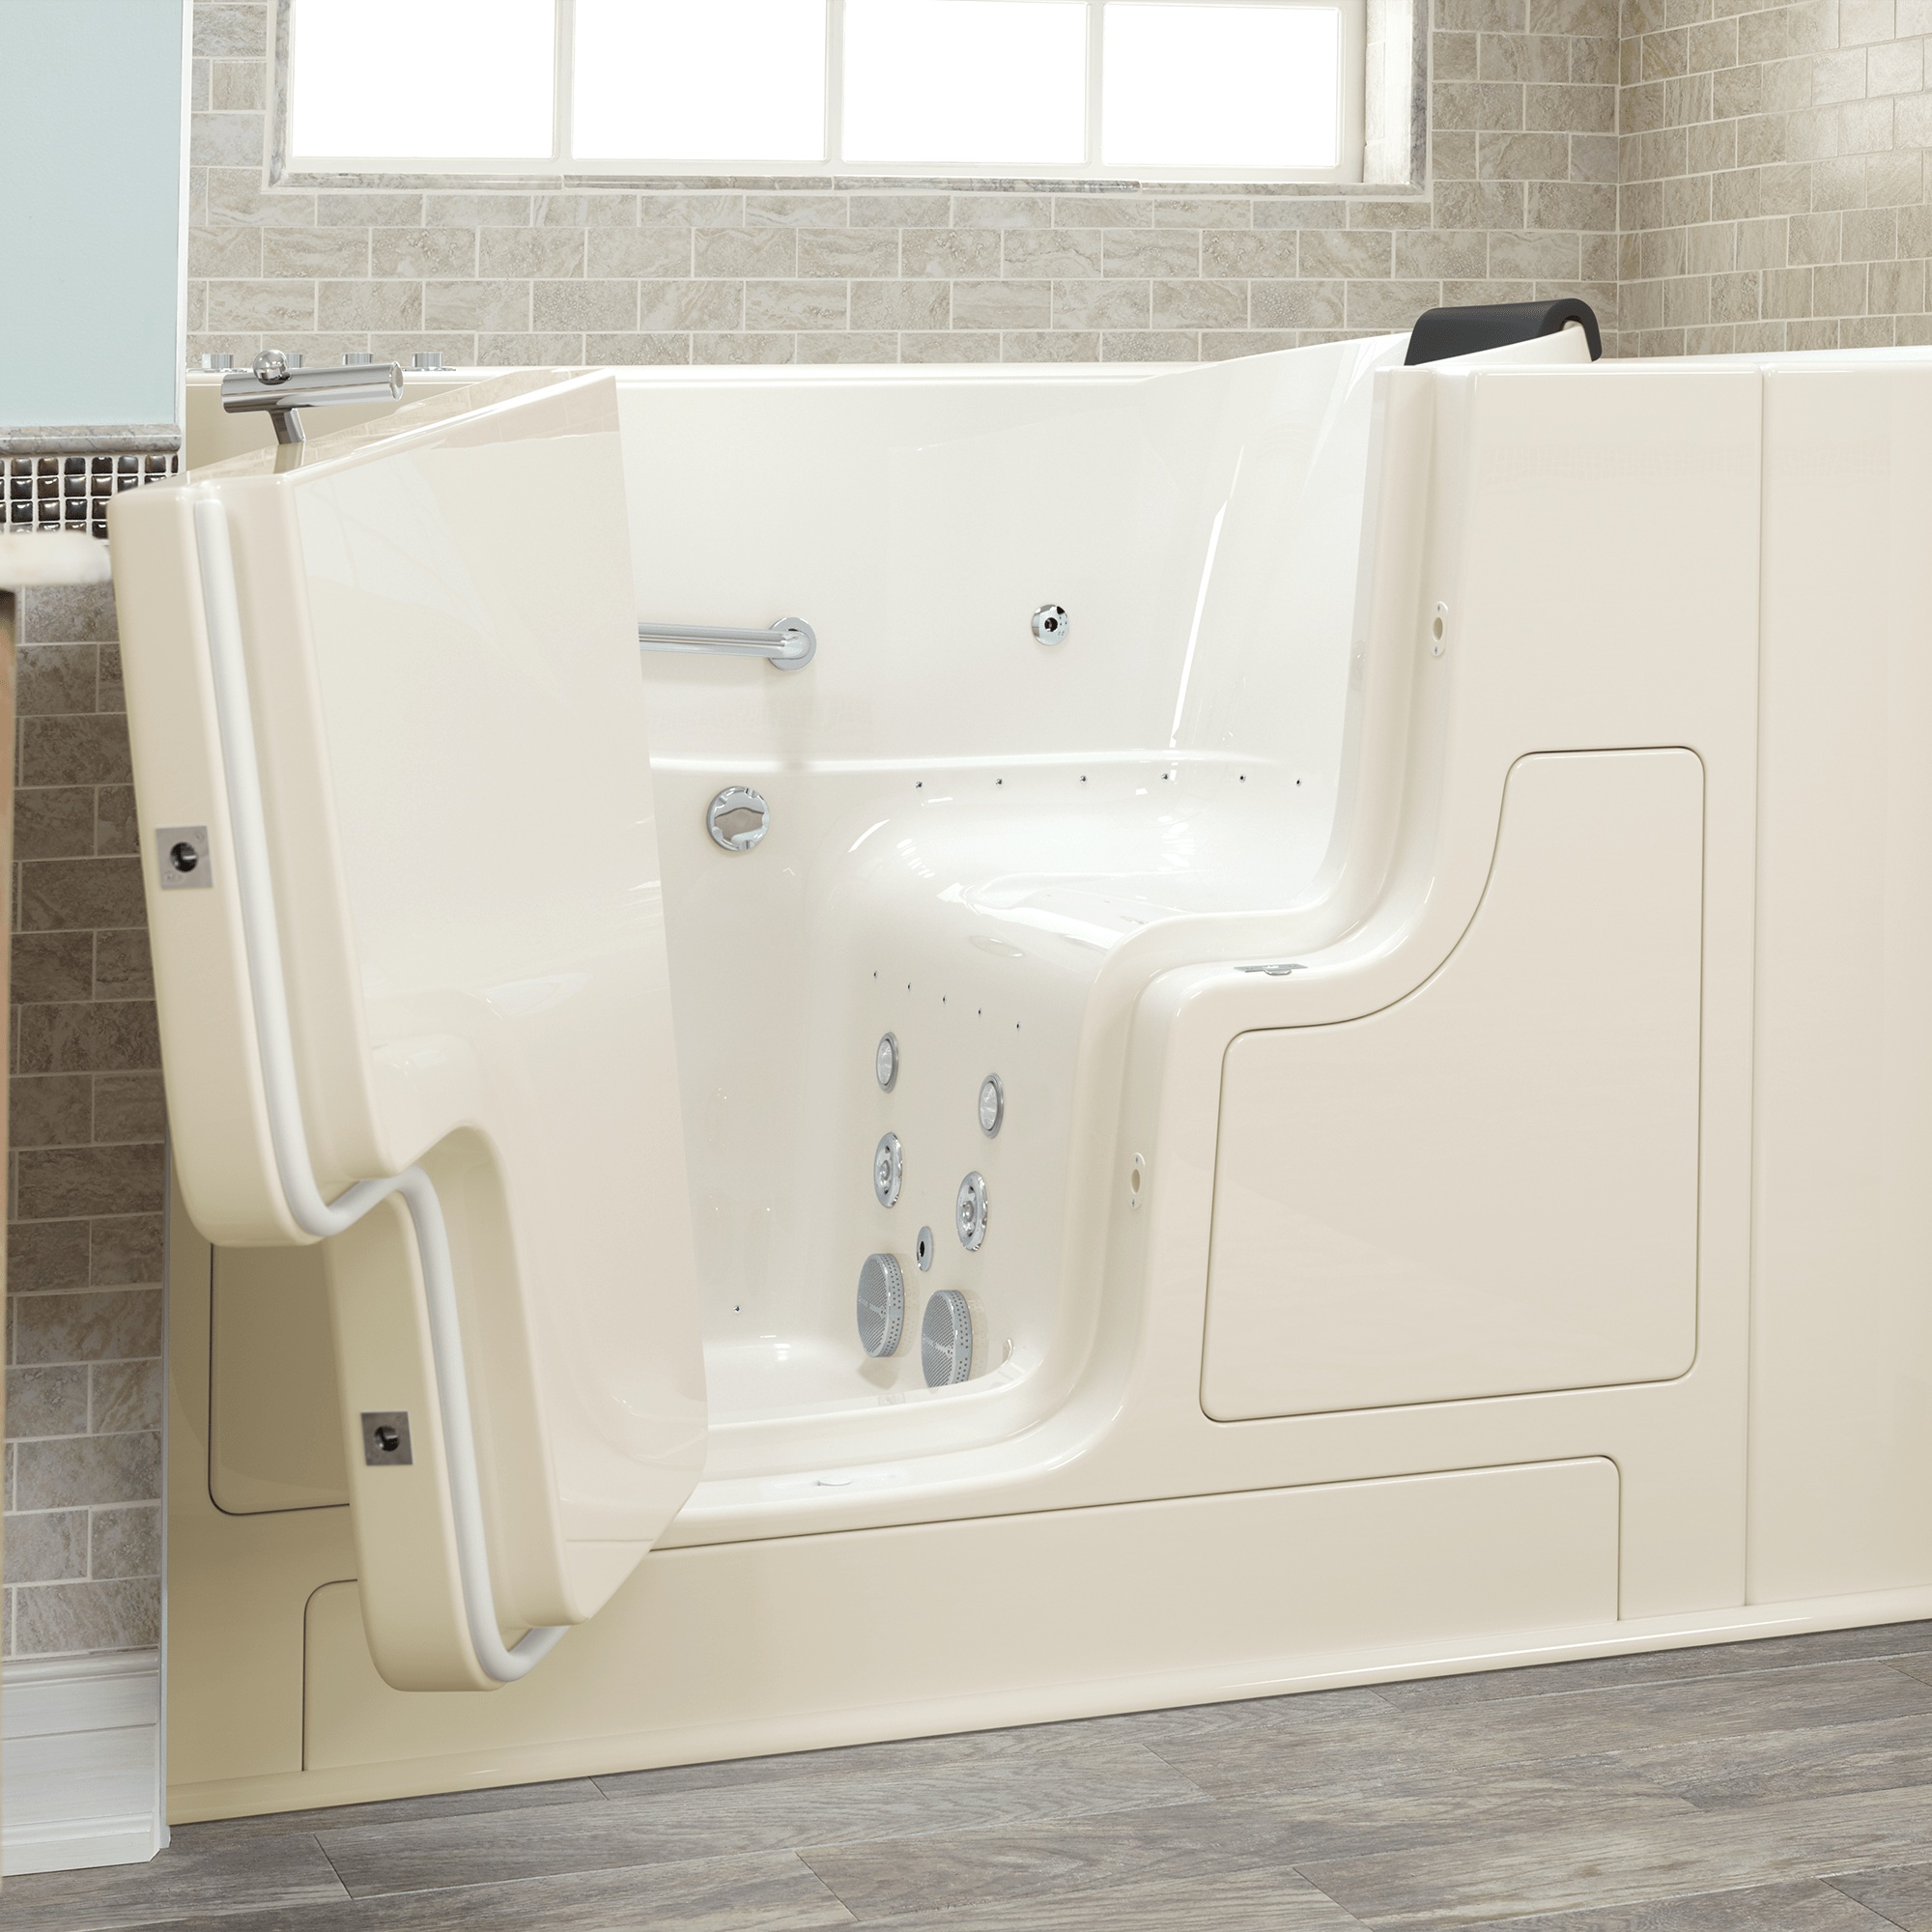 Gelcoat Premium Series 30 x 52  Inch Walk in Tub With Combination Air Spa and Whirlpool Systems   Left Hand Drain WIB LINEN